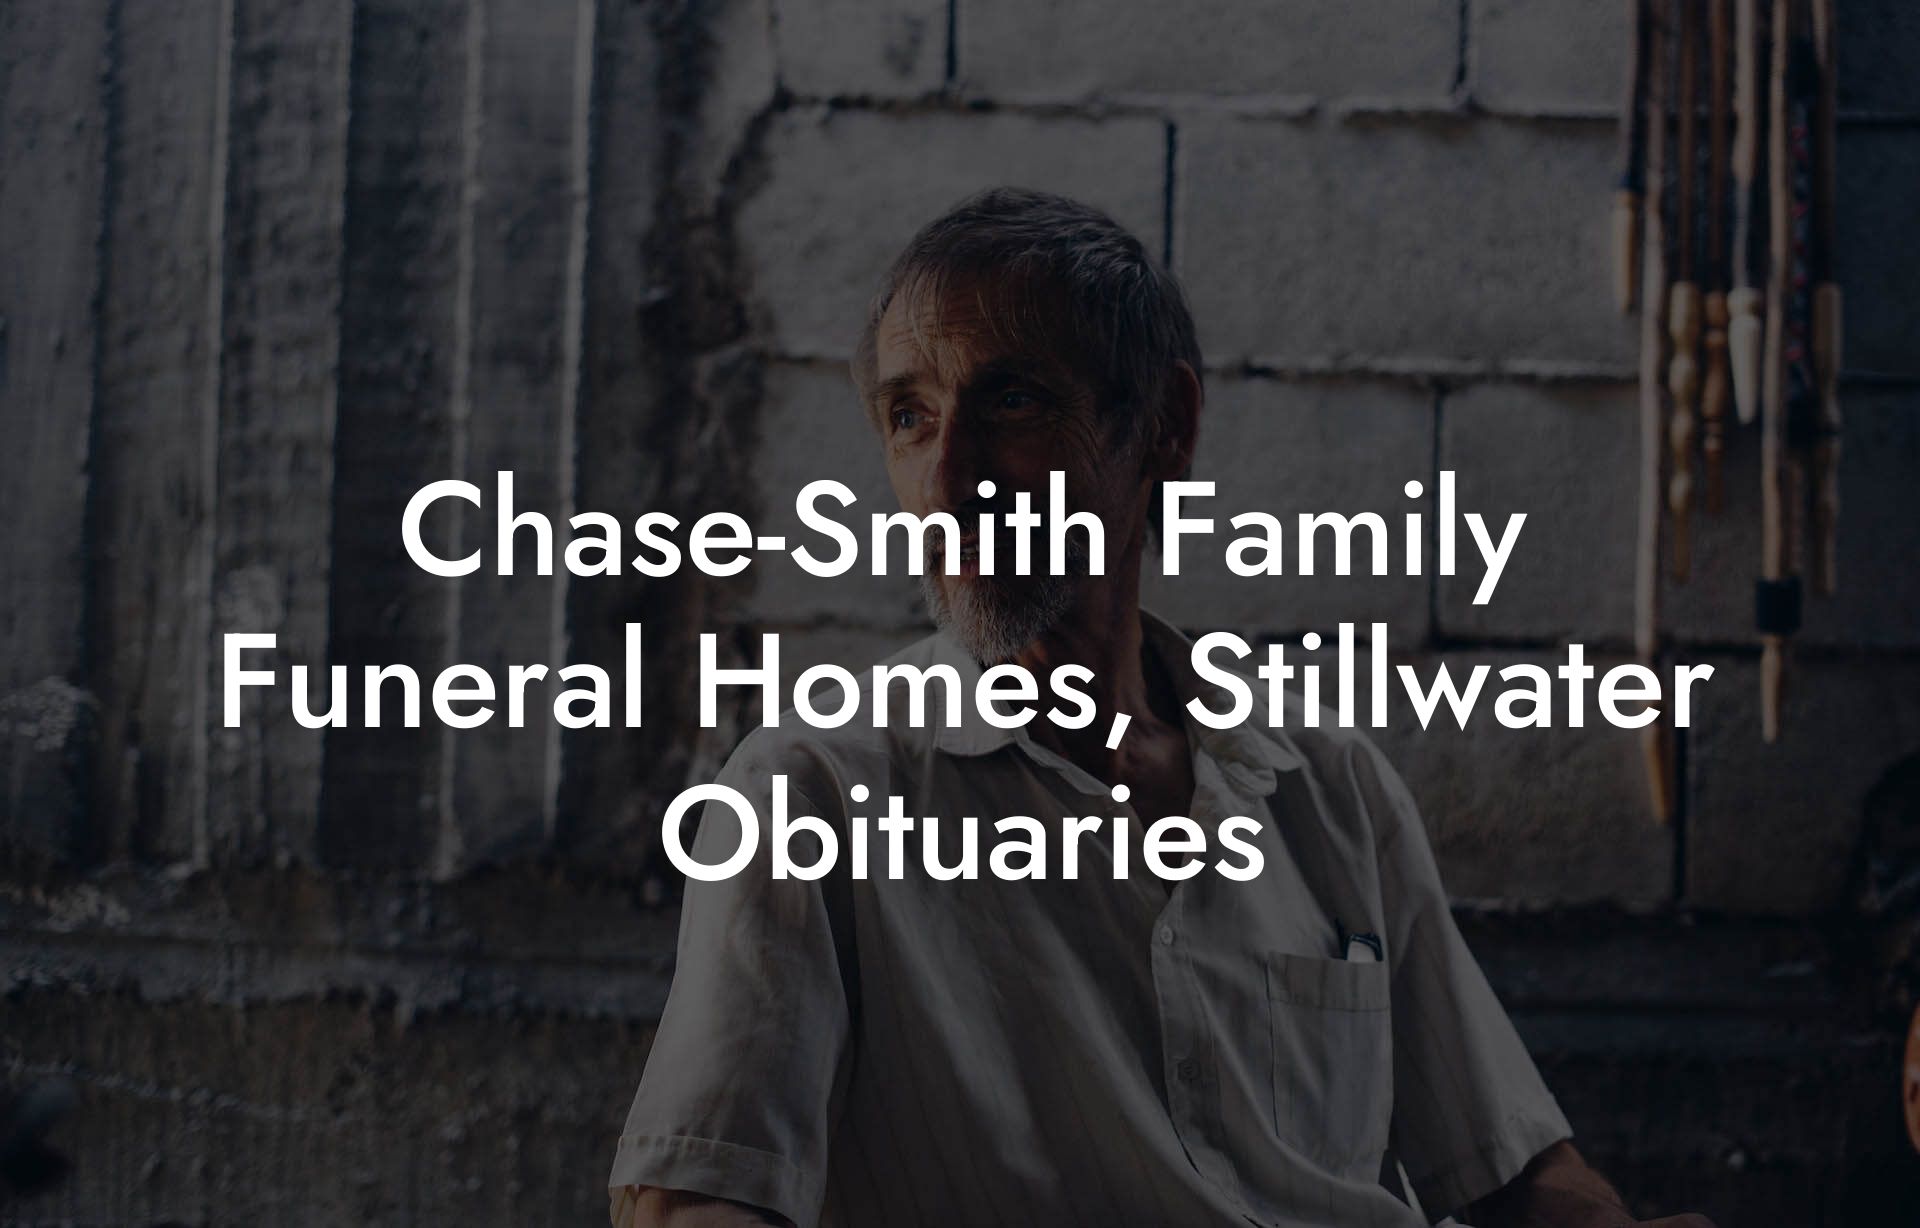 Chase-Smith Family Funeral Homes, Stillwater Obituaries